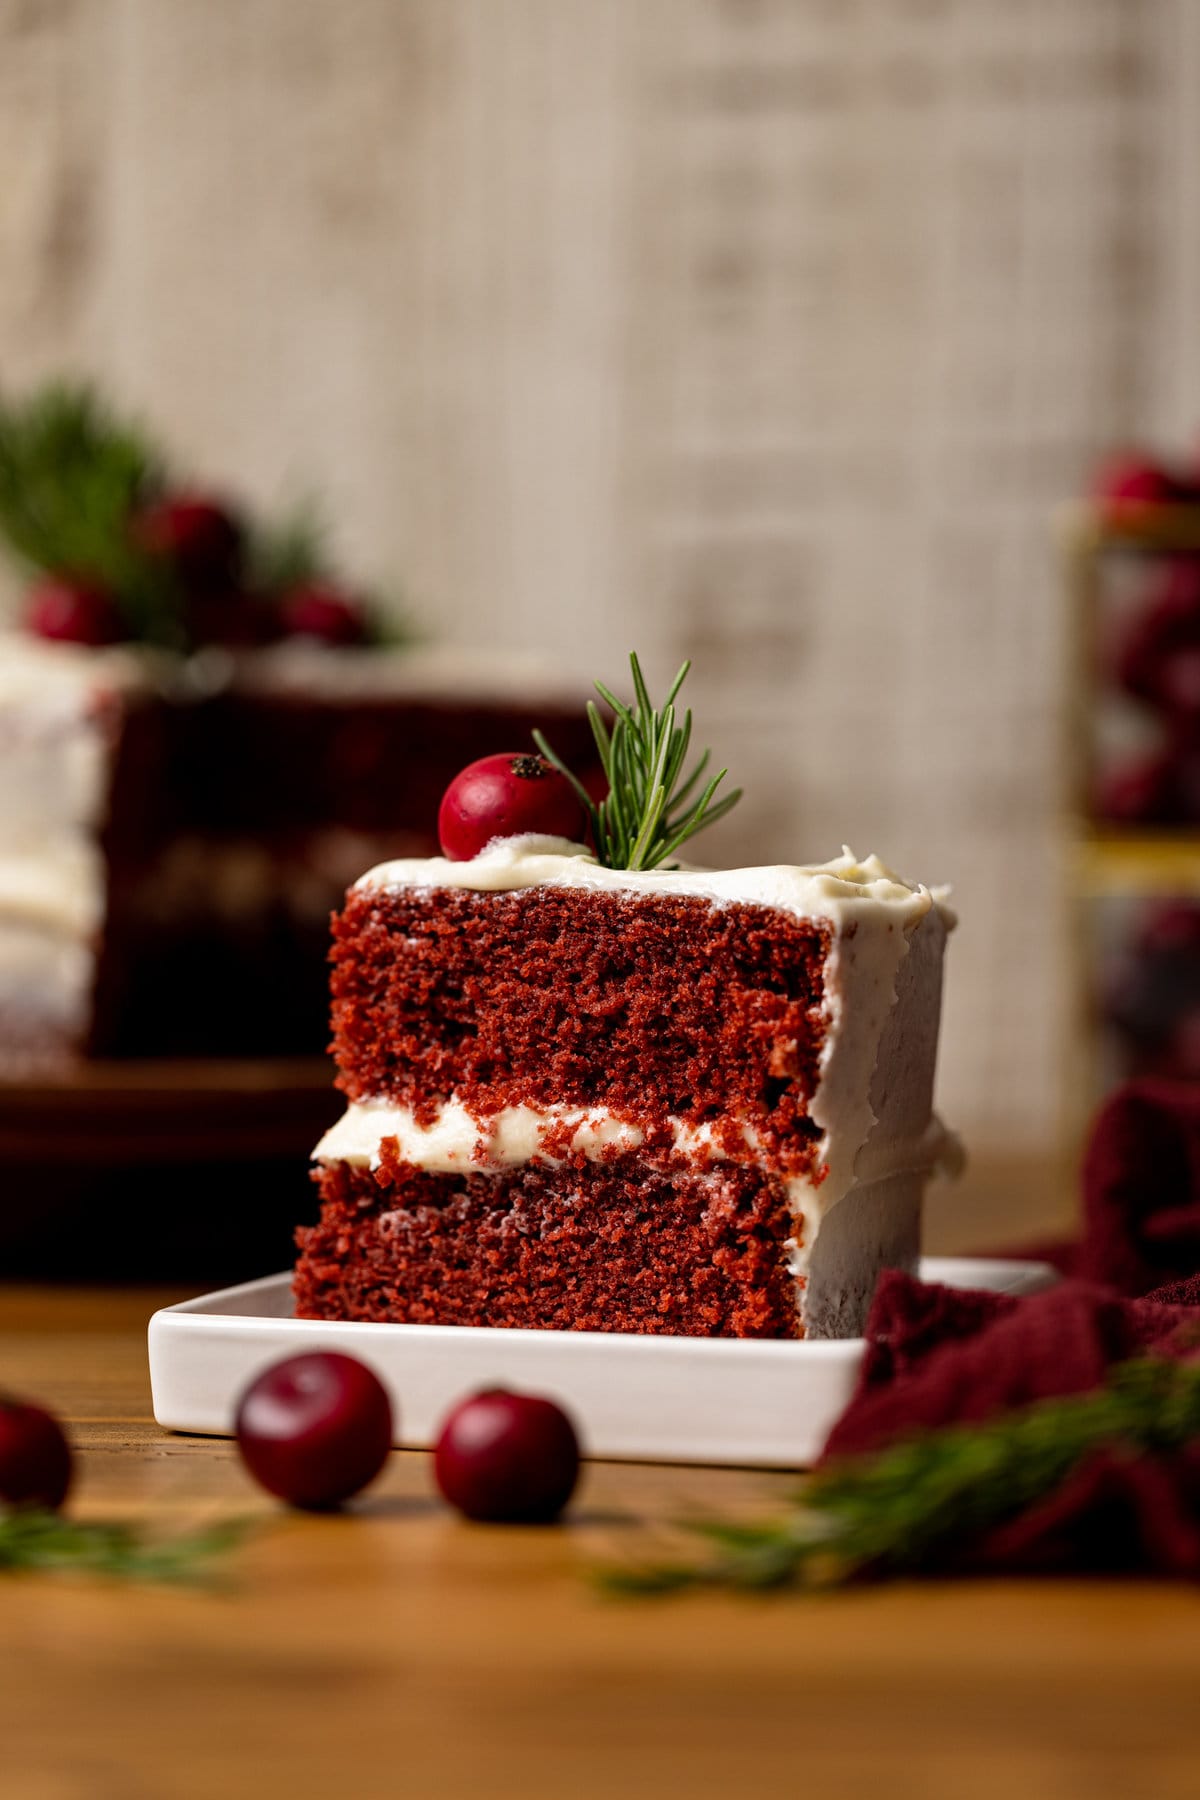 Slice of Red Velvet Cake with Cream Cheese Frosting